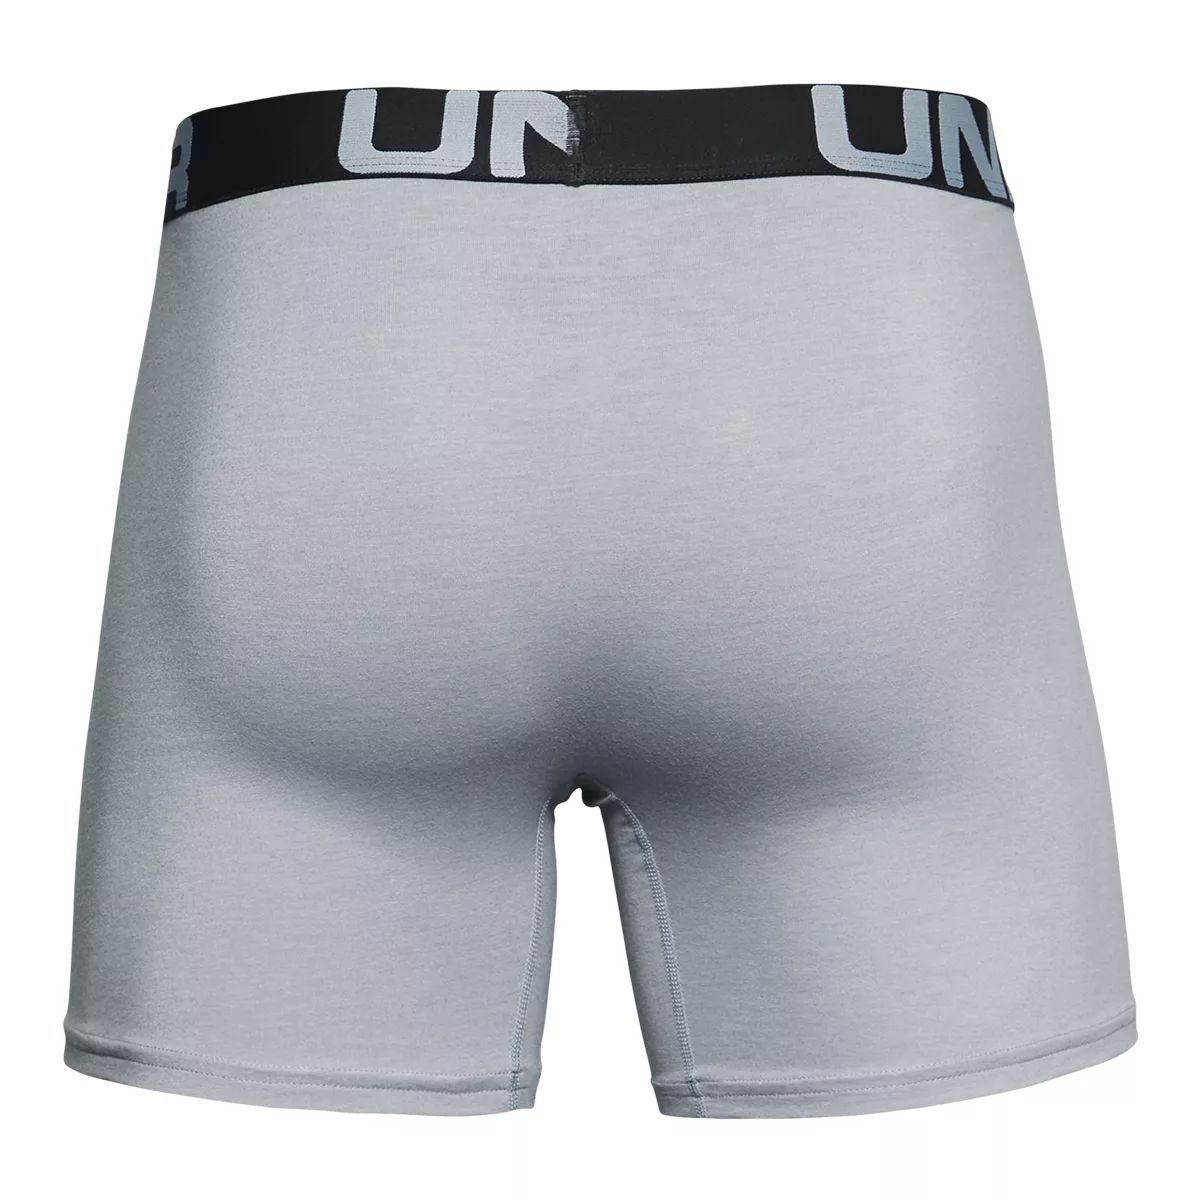 Under Armour Mens UA Charged Cotton 6 Stretch BoxerJock Underwear 3-Pack